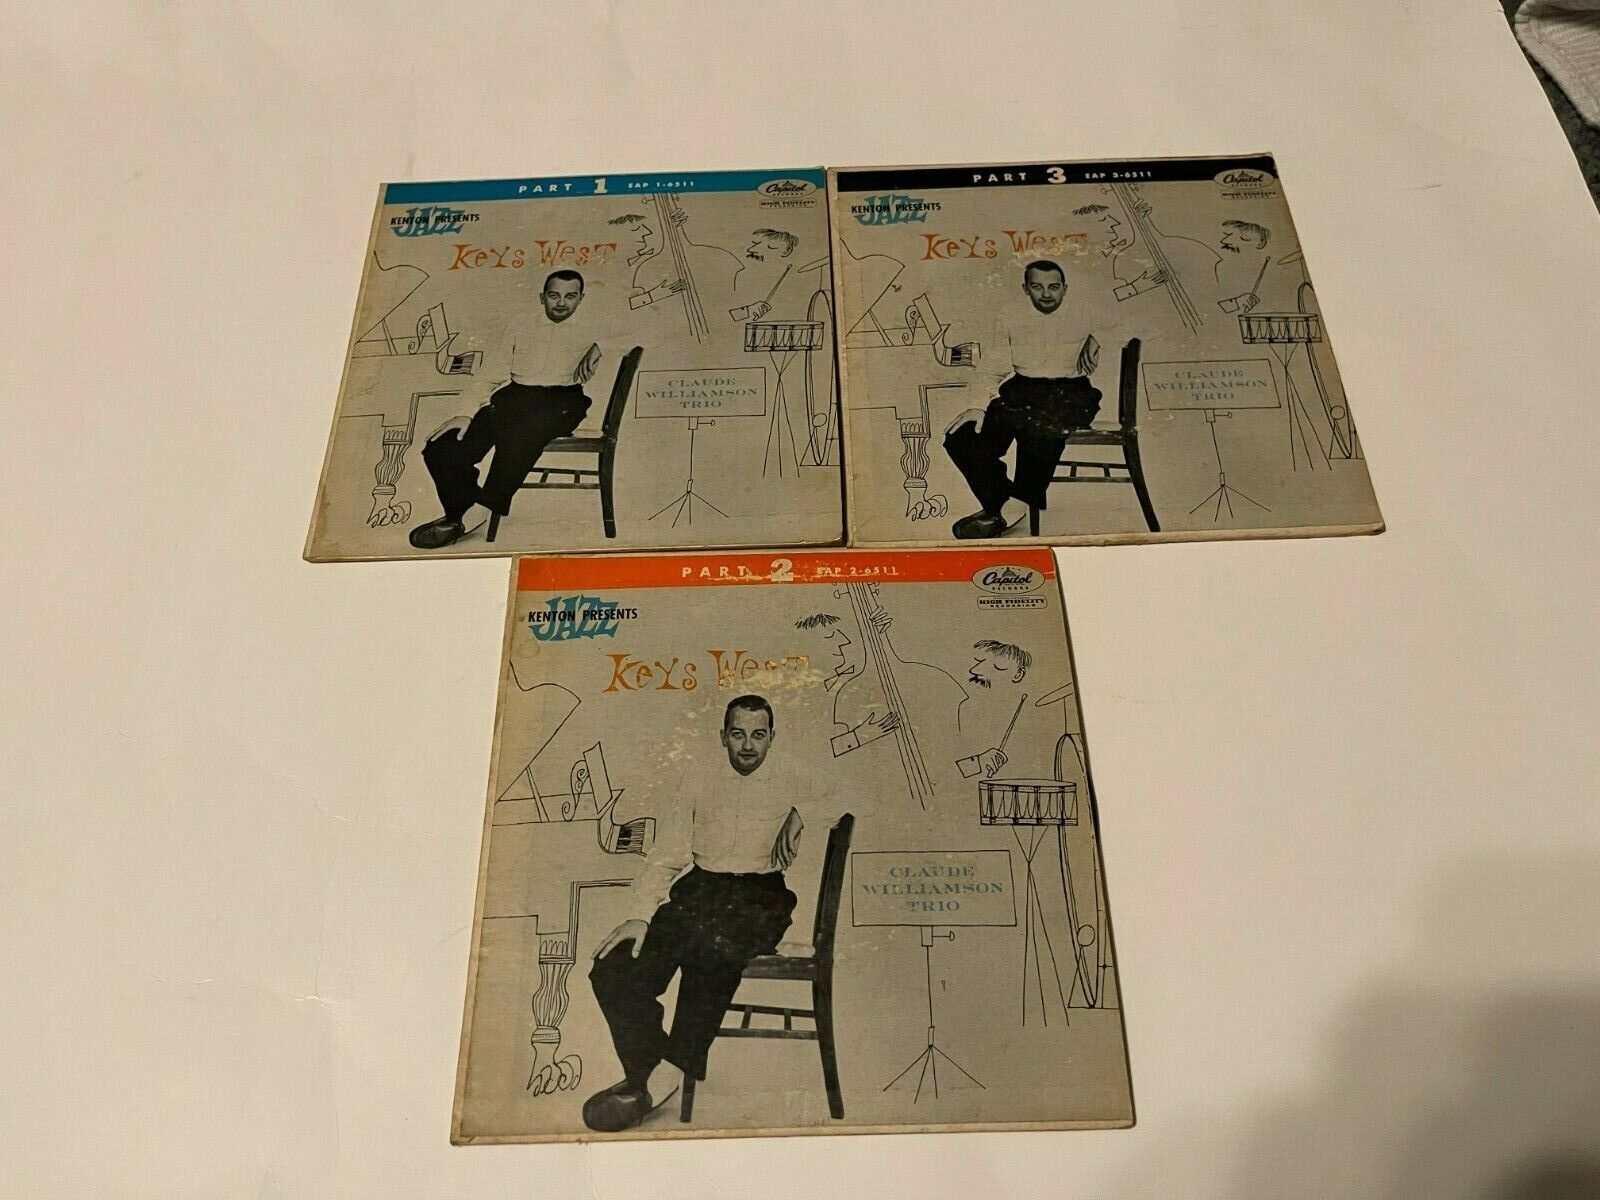 Claude Williamson Trio Keys West Parts 1,2, and 3 ep 45 record, 3 record set